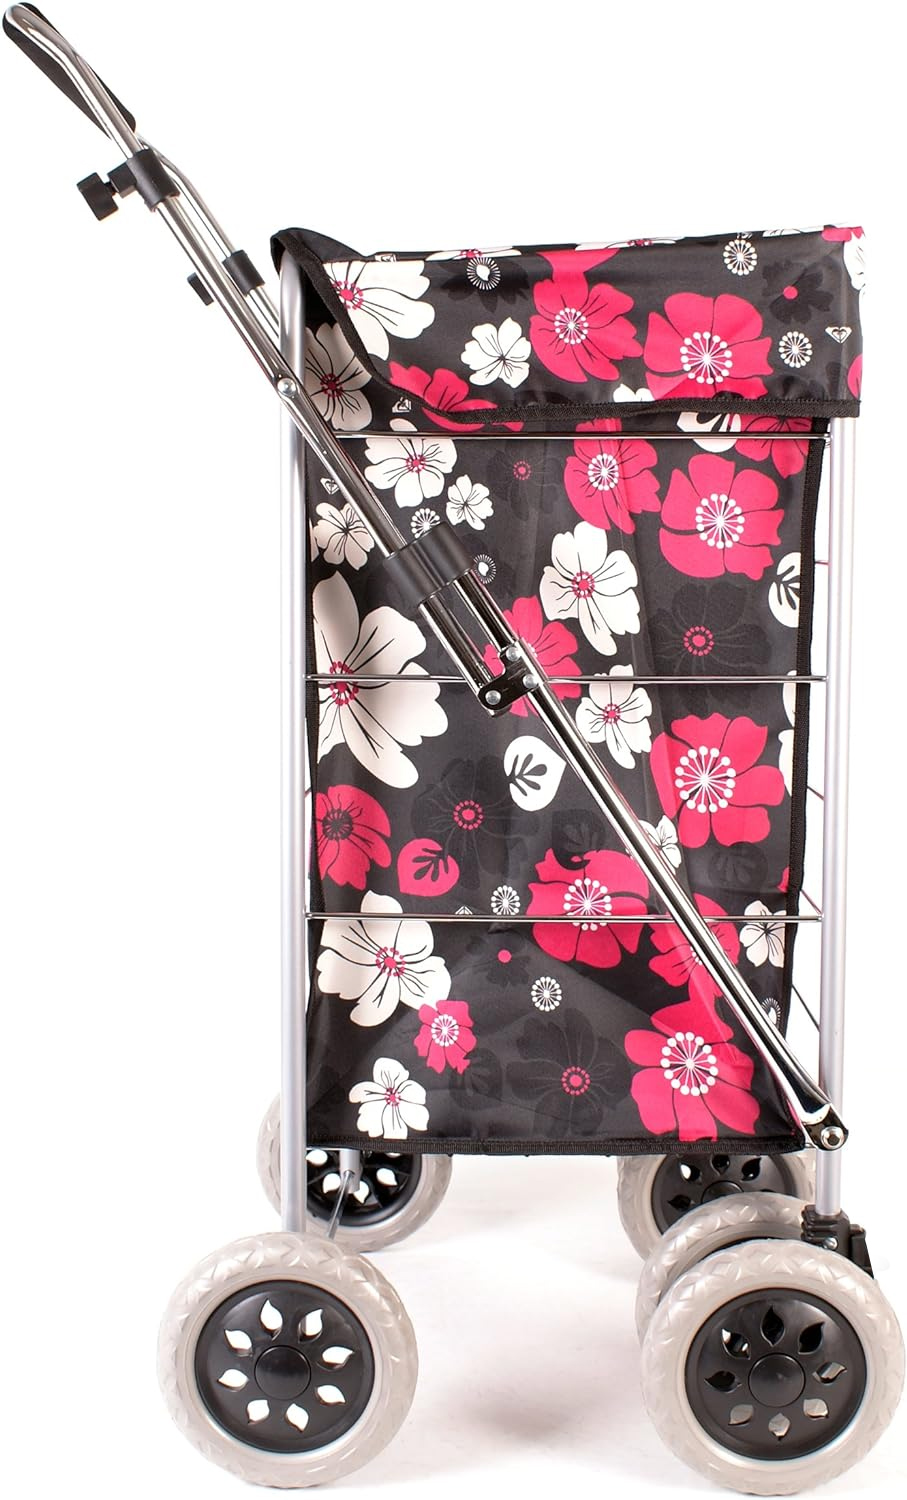 Alaska Premium 6 Wheel Swivel Shopping Trolley with Adjustable Handle Black with Pink and White Floral Print #2